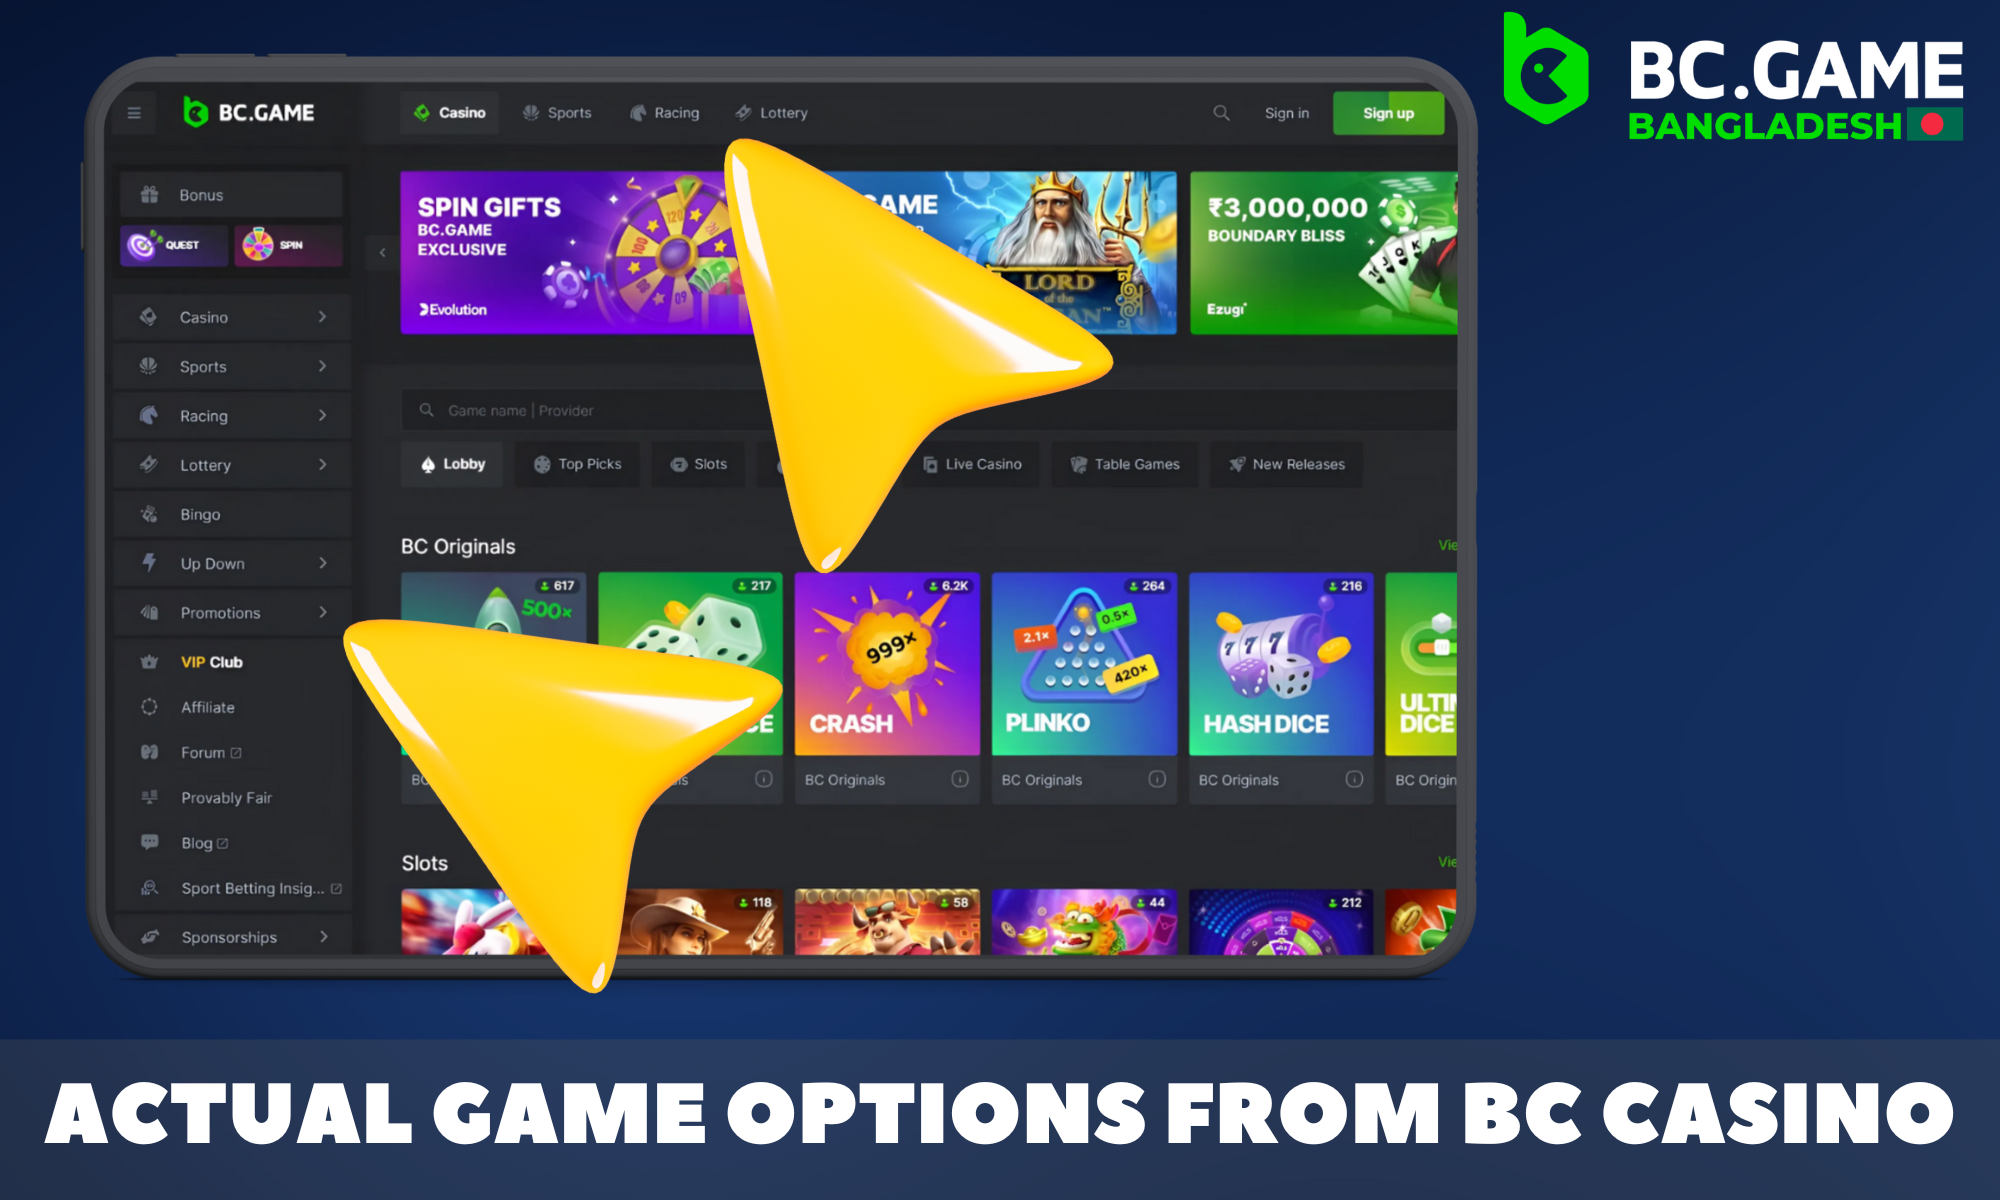 An overview of the current BC Game gaming options available to players from Bangladesh